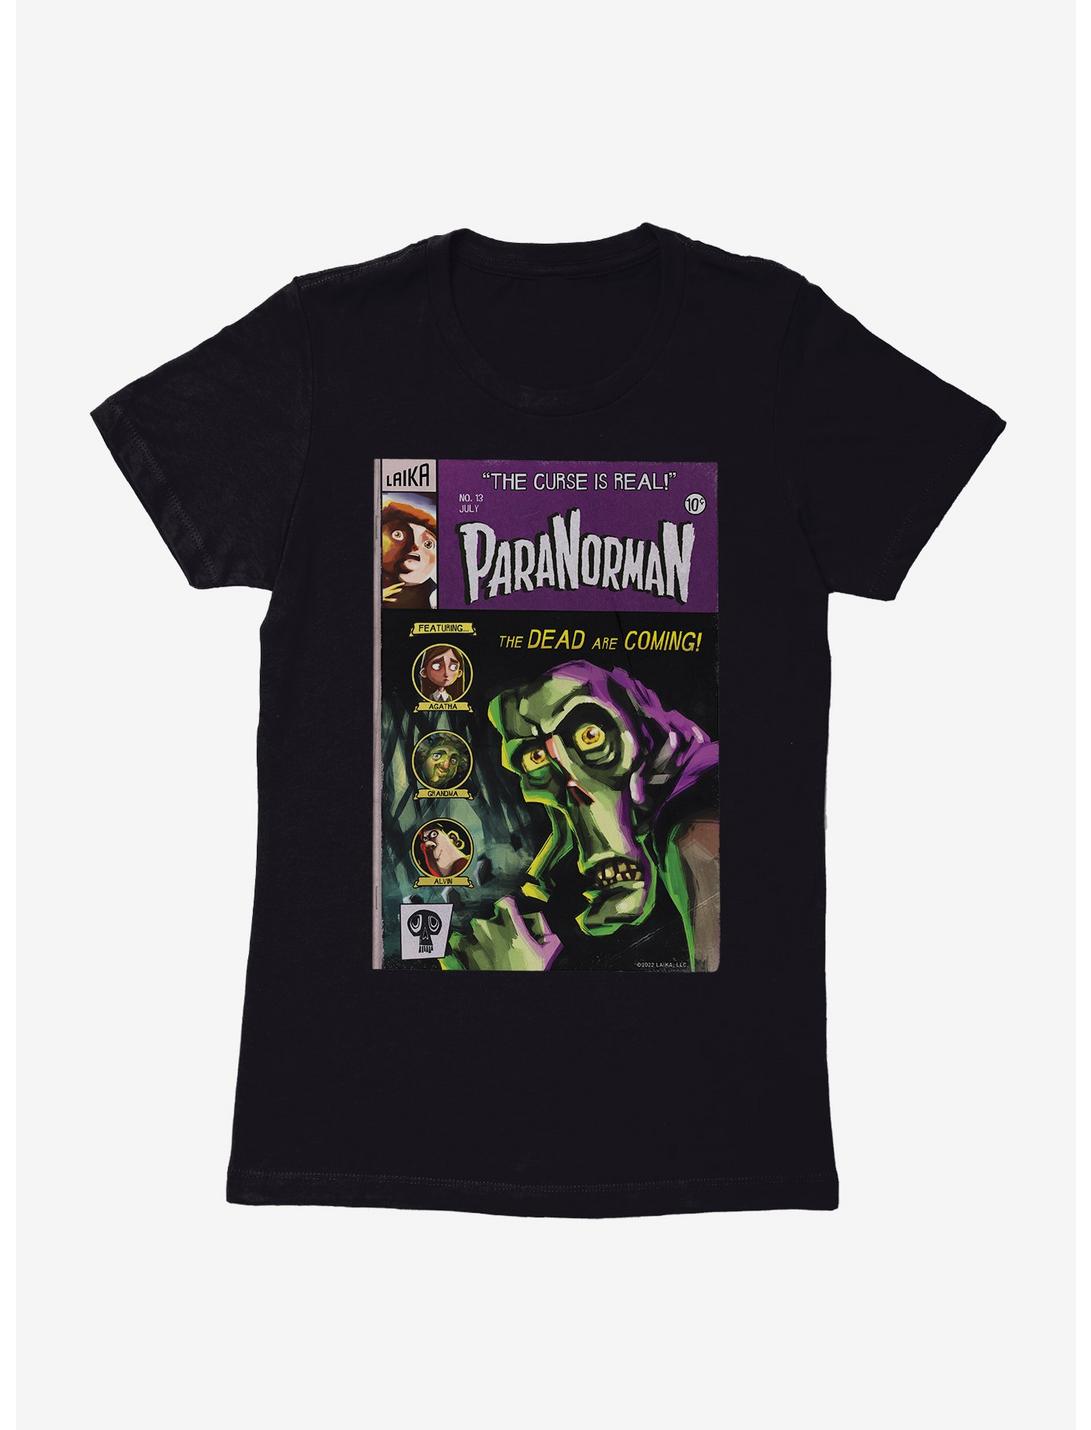 ParaNorman The Curse Is Real Womens T-Shirt, BLACK, hi-res